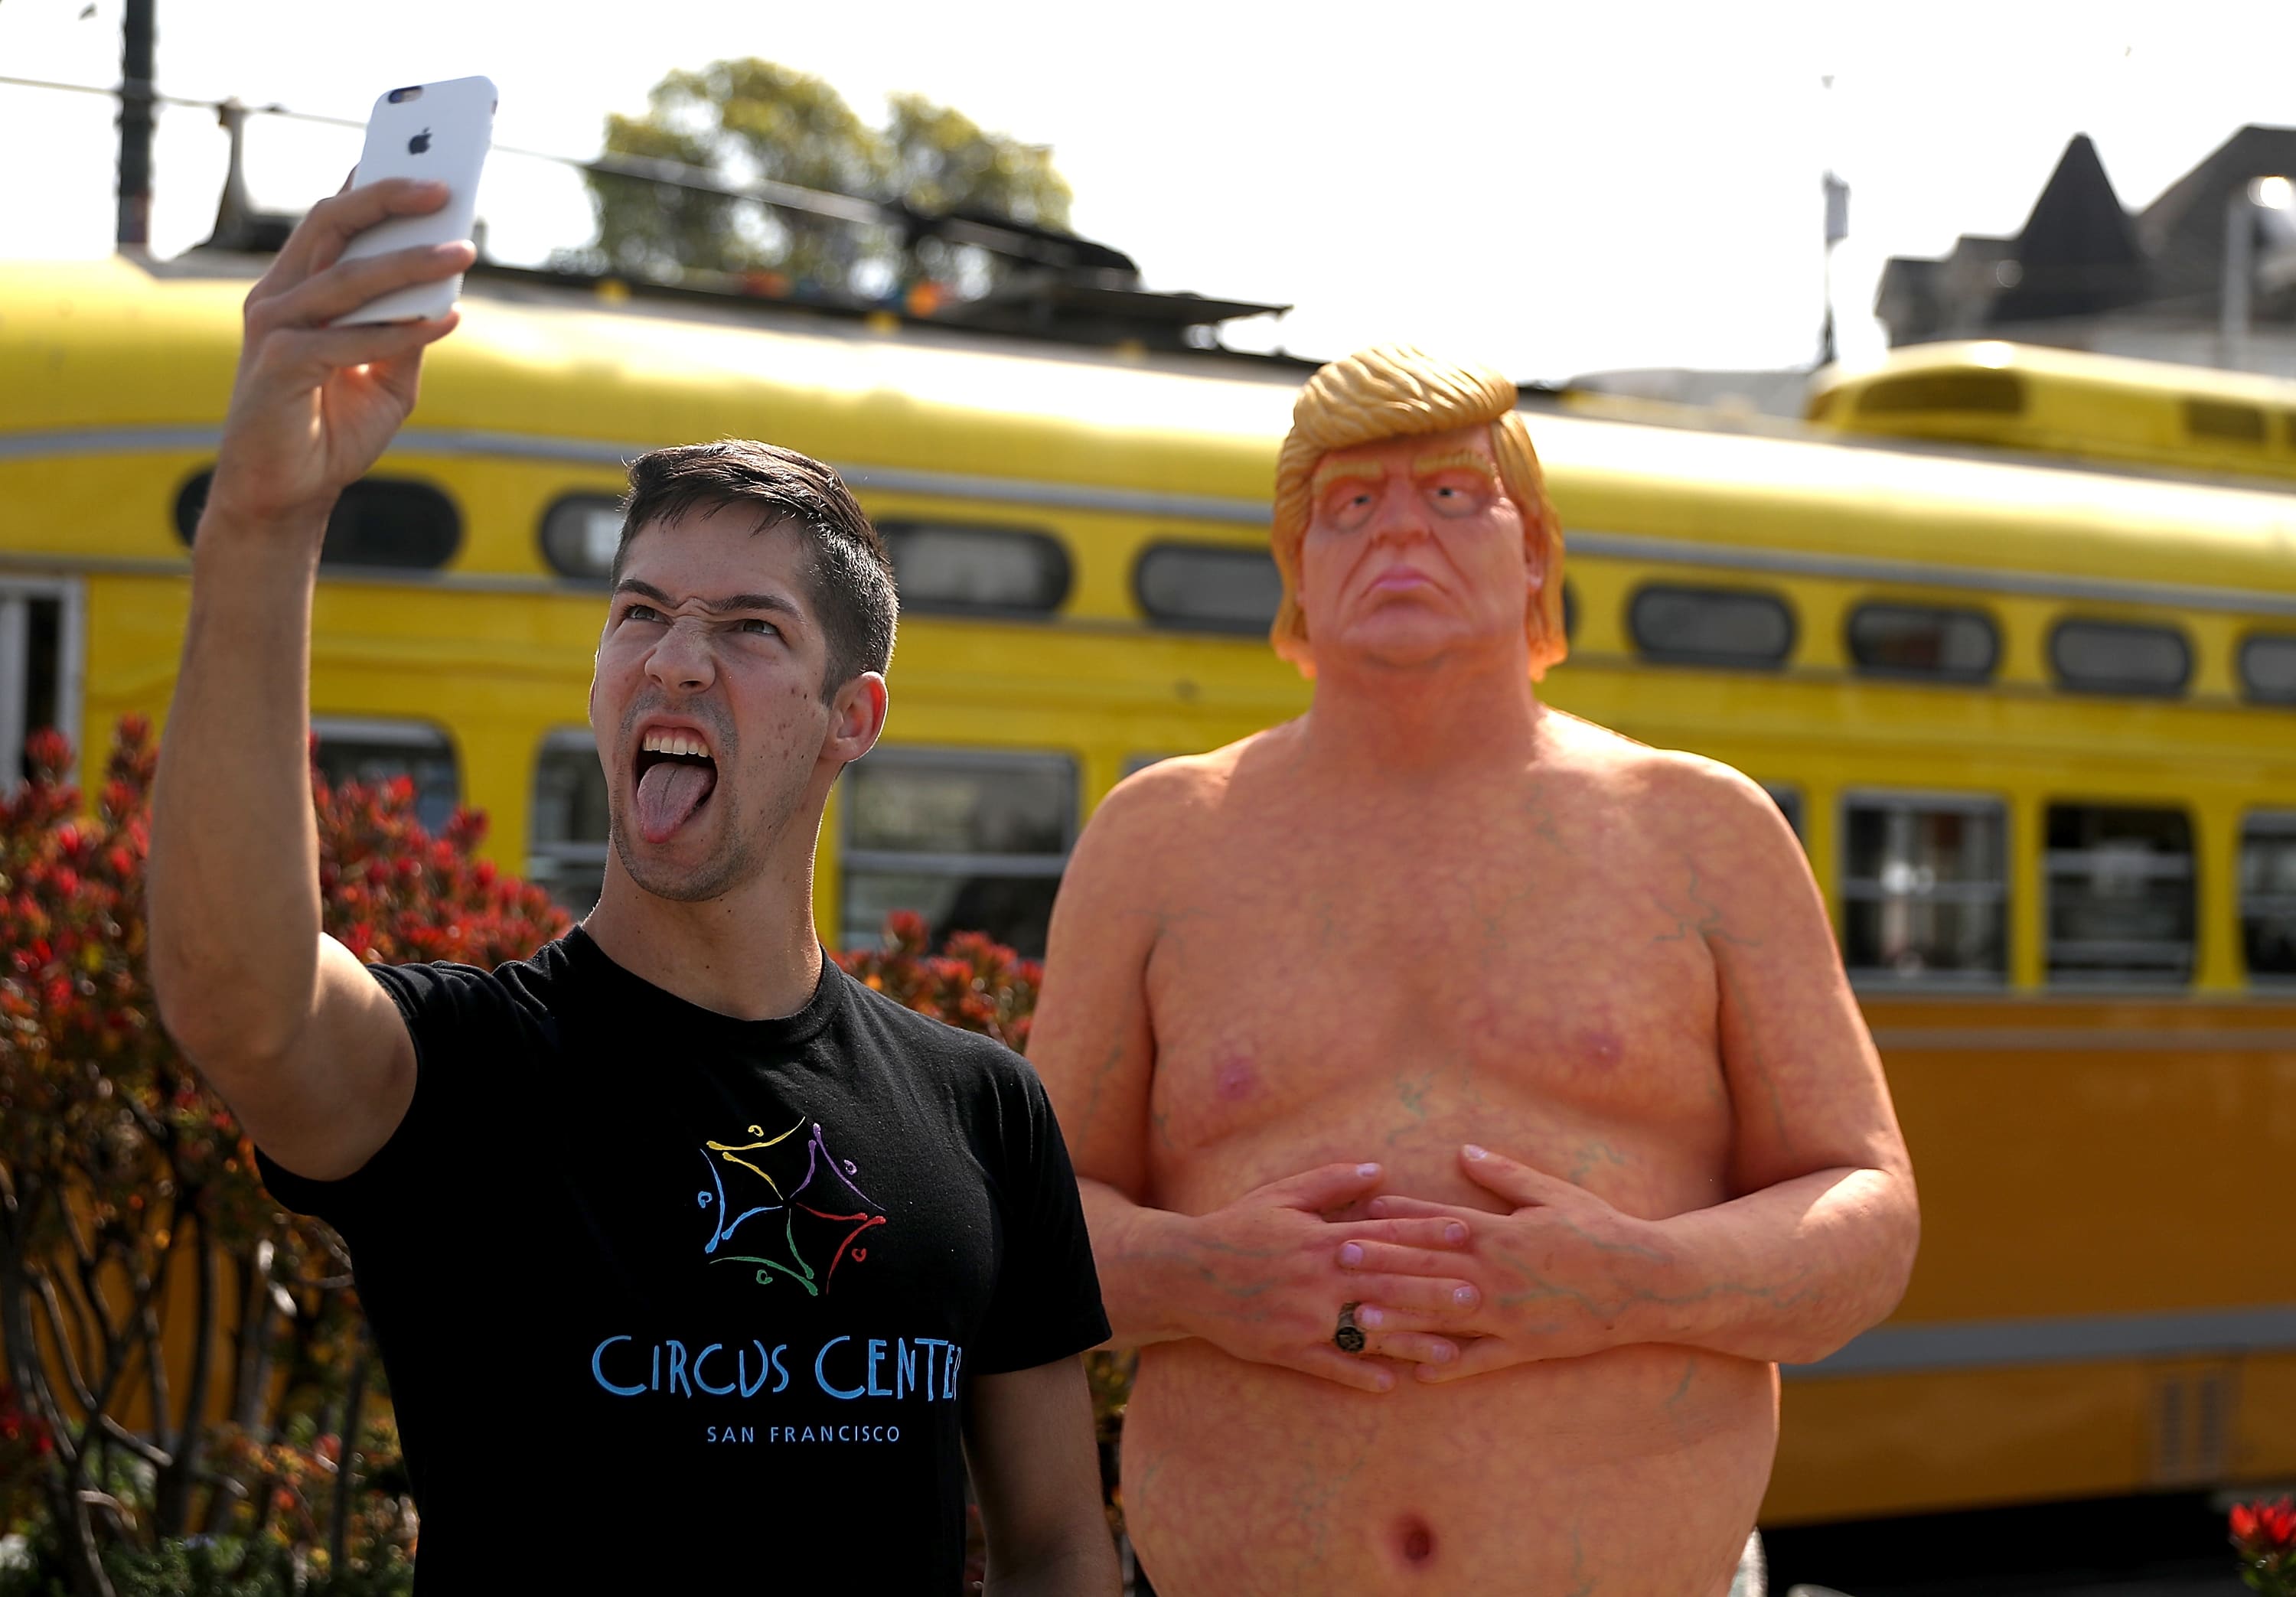 Naked Donald Trump statue to be sold in